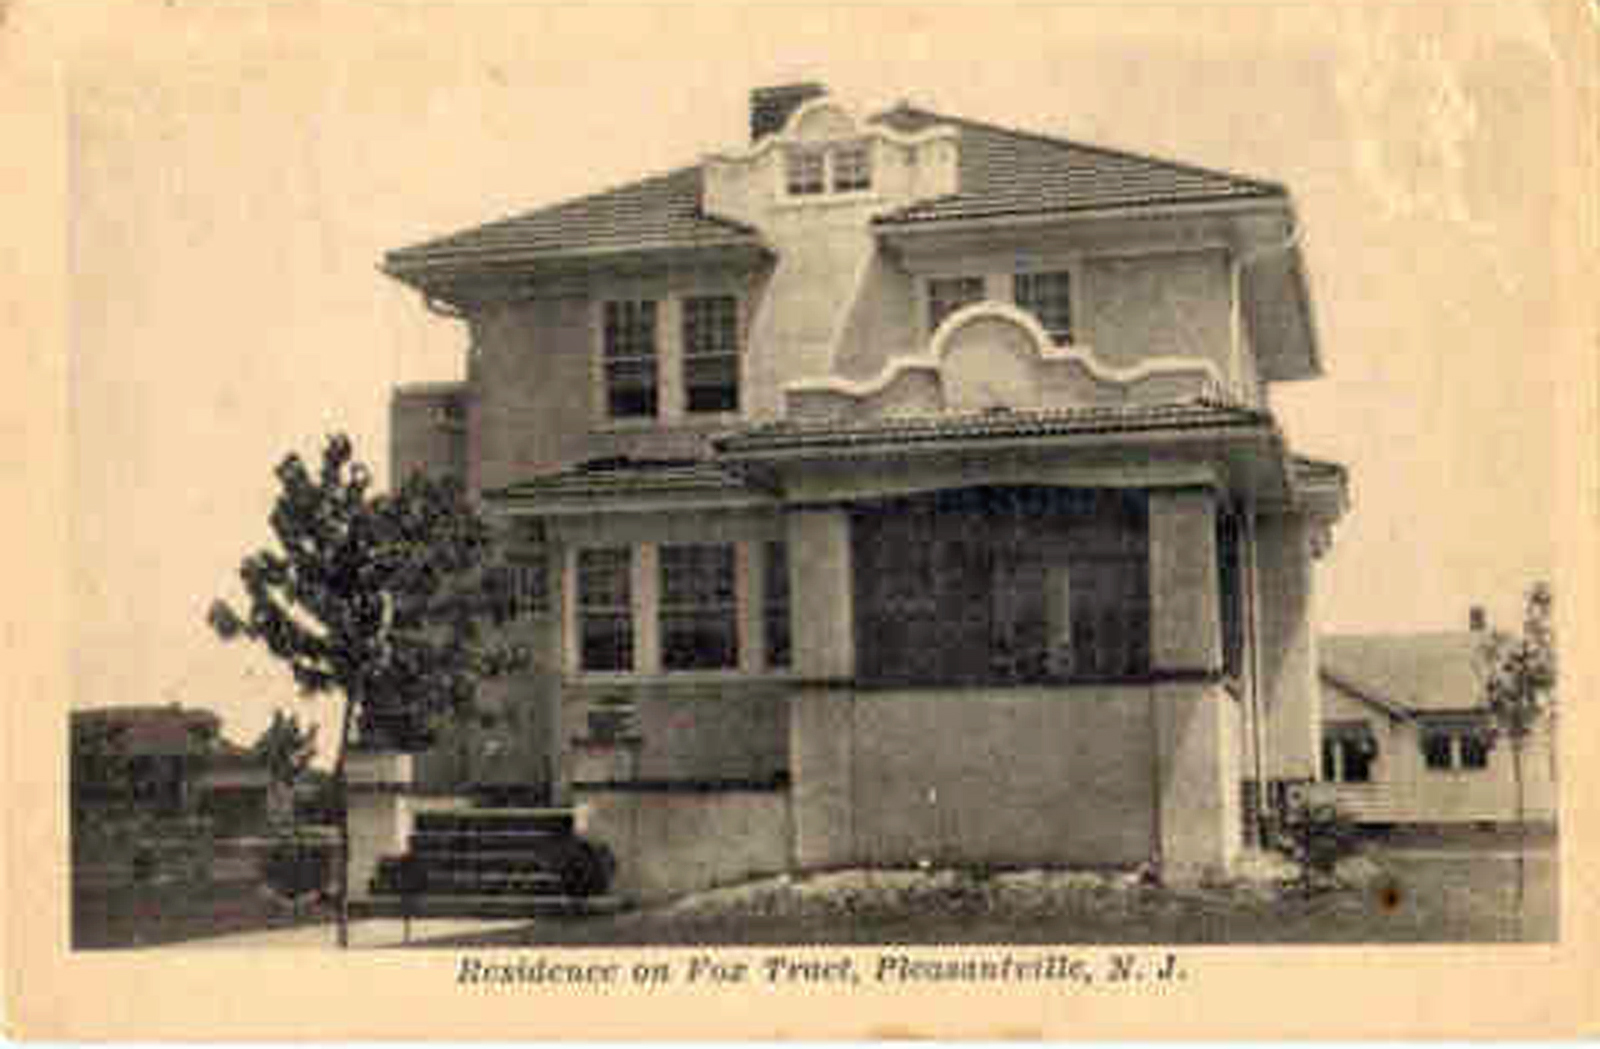 Pleasantville - A house in the Fox Tract copy